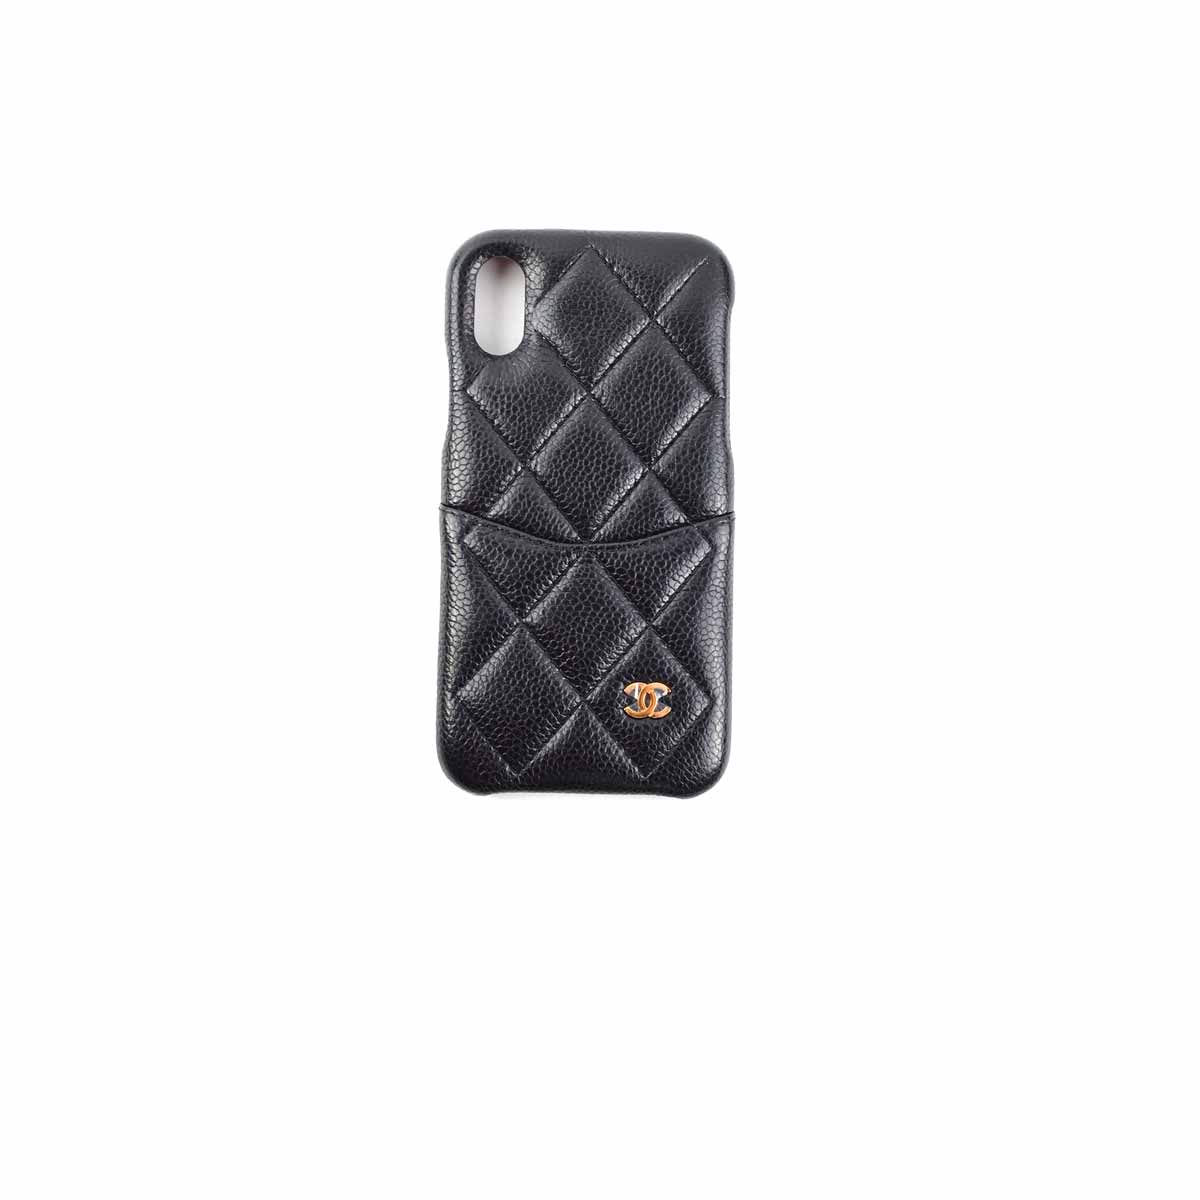 Chanel IPhone X Case Quilted Caviar Black - THE PURSE AFFAIR